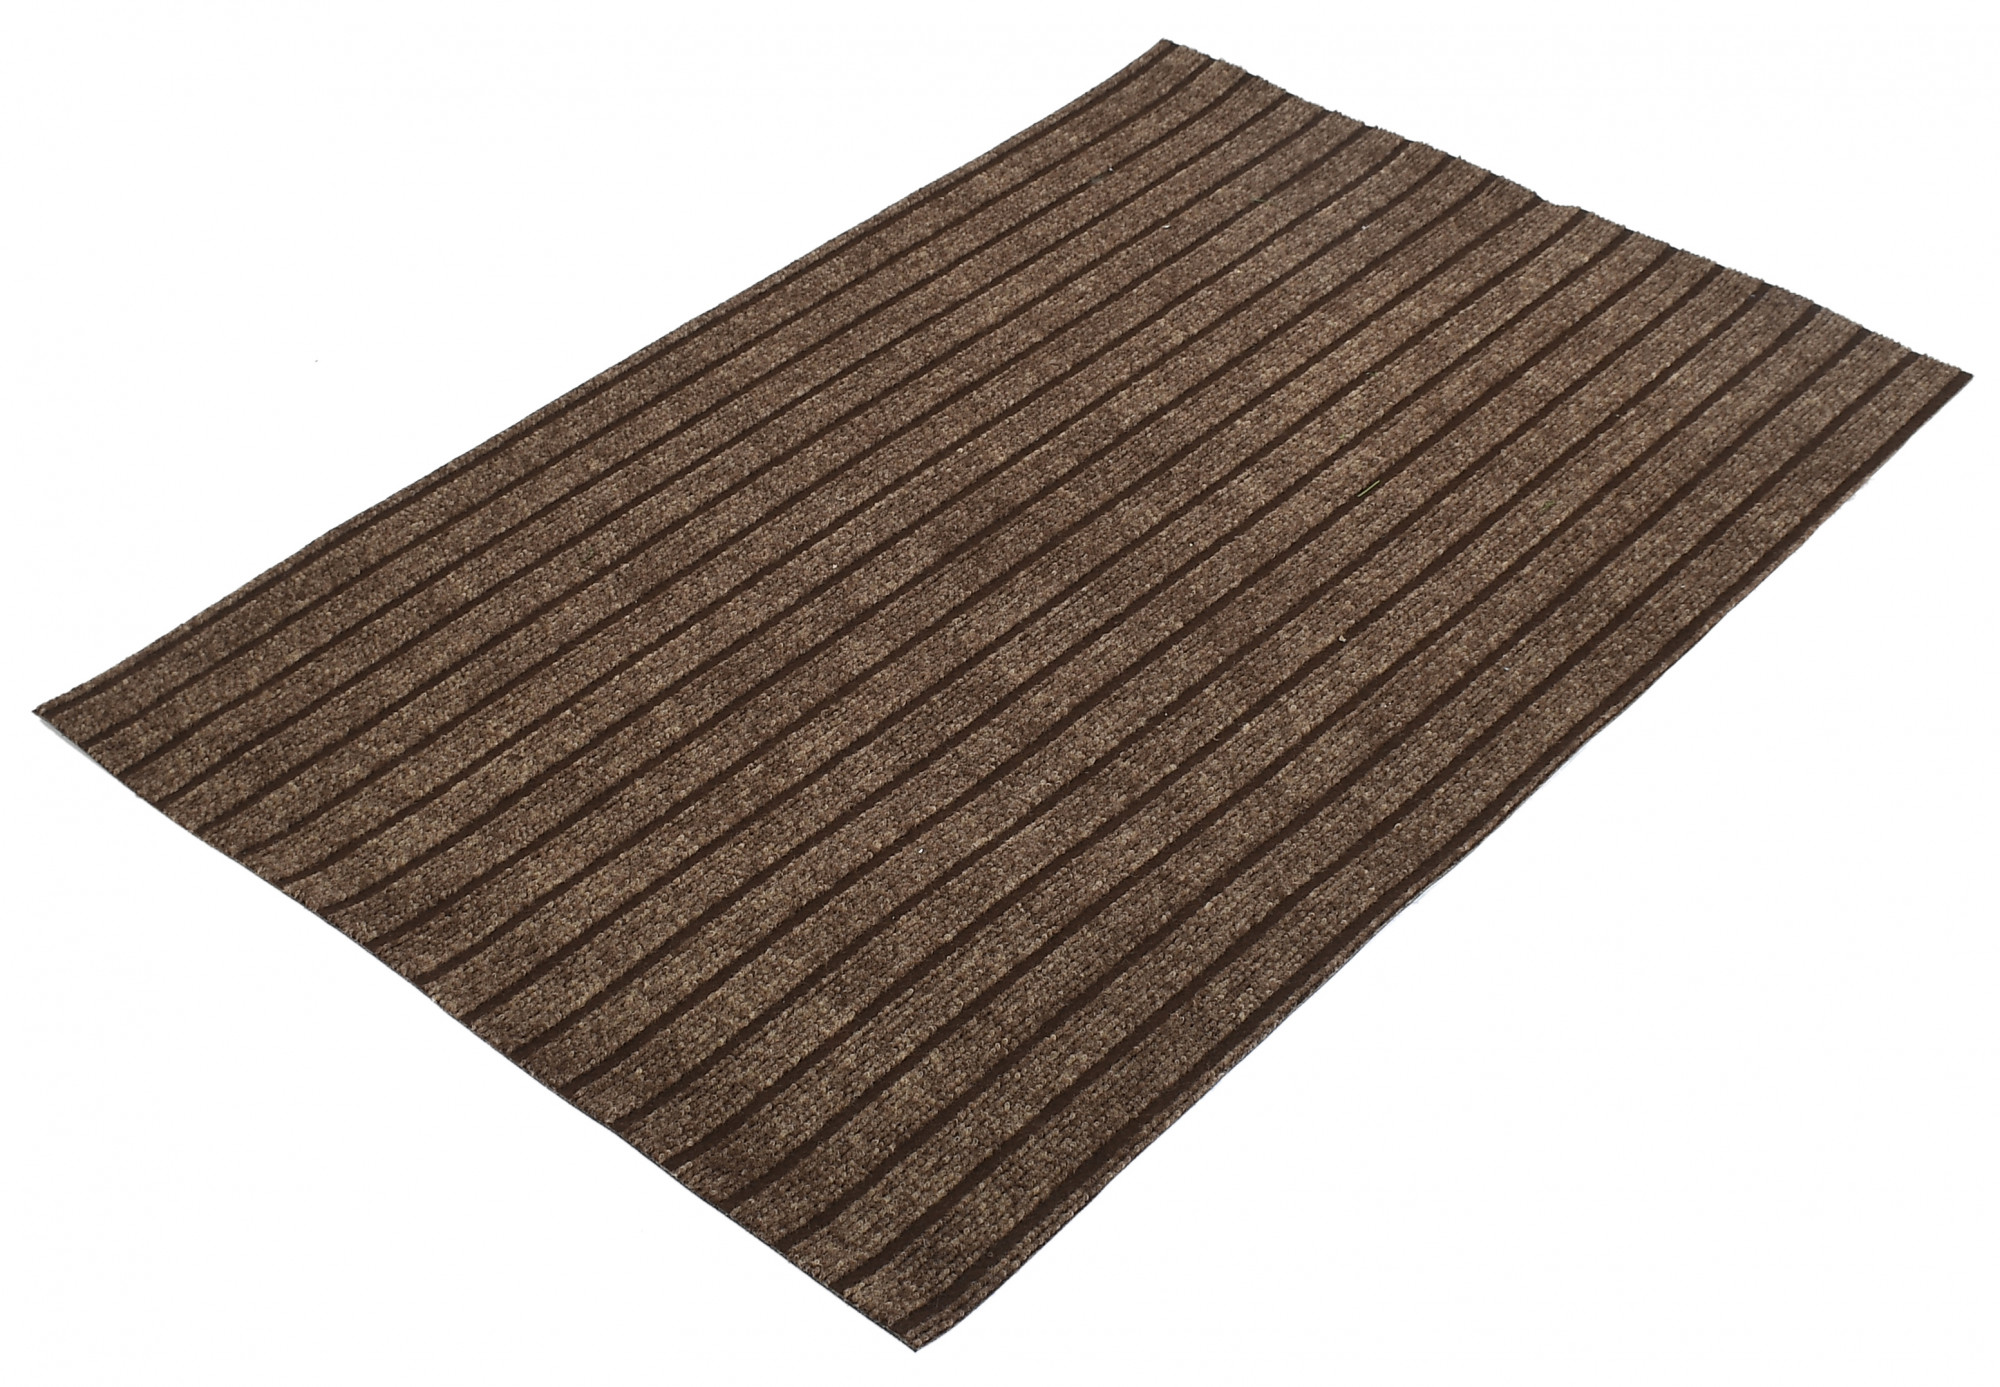 Kuber Industries All Weather Entry and Back Yard Door Mat, Indoor and Outdoor Safe, Non-Slip Rubber Backing, Absorbent and Waterproof, Dirt Trapping Rugs for Entryway -16